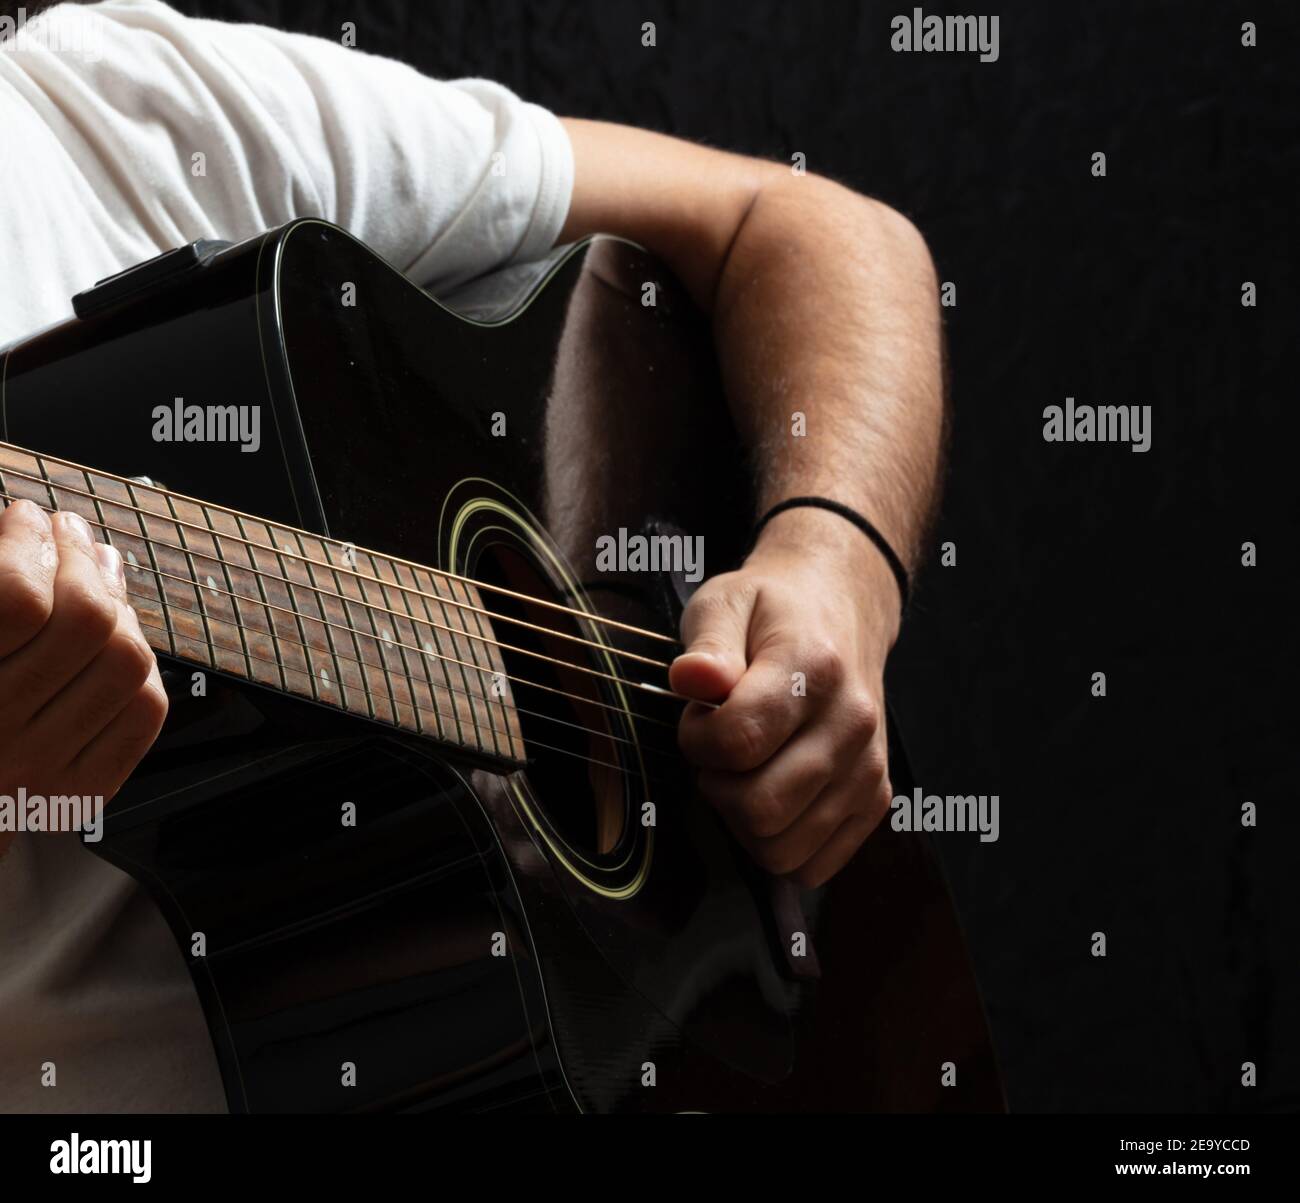 Entertainment concept. Young man playing acoustic guitar, dark background. Guitarist in casual white shirt holds electric black instrument at studio. Stock Photo